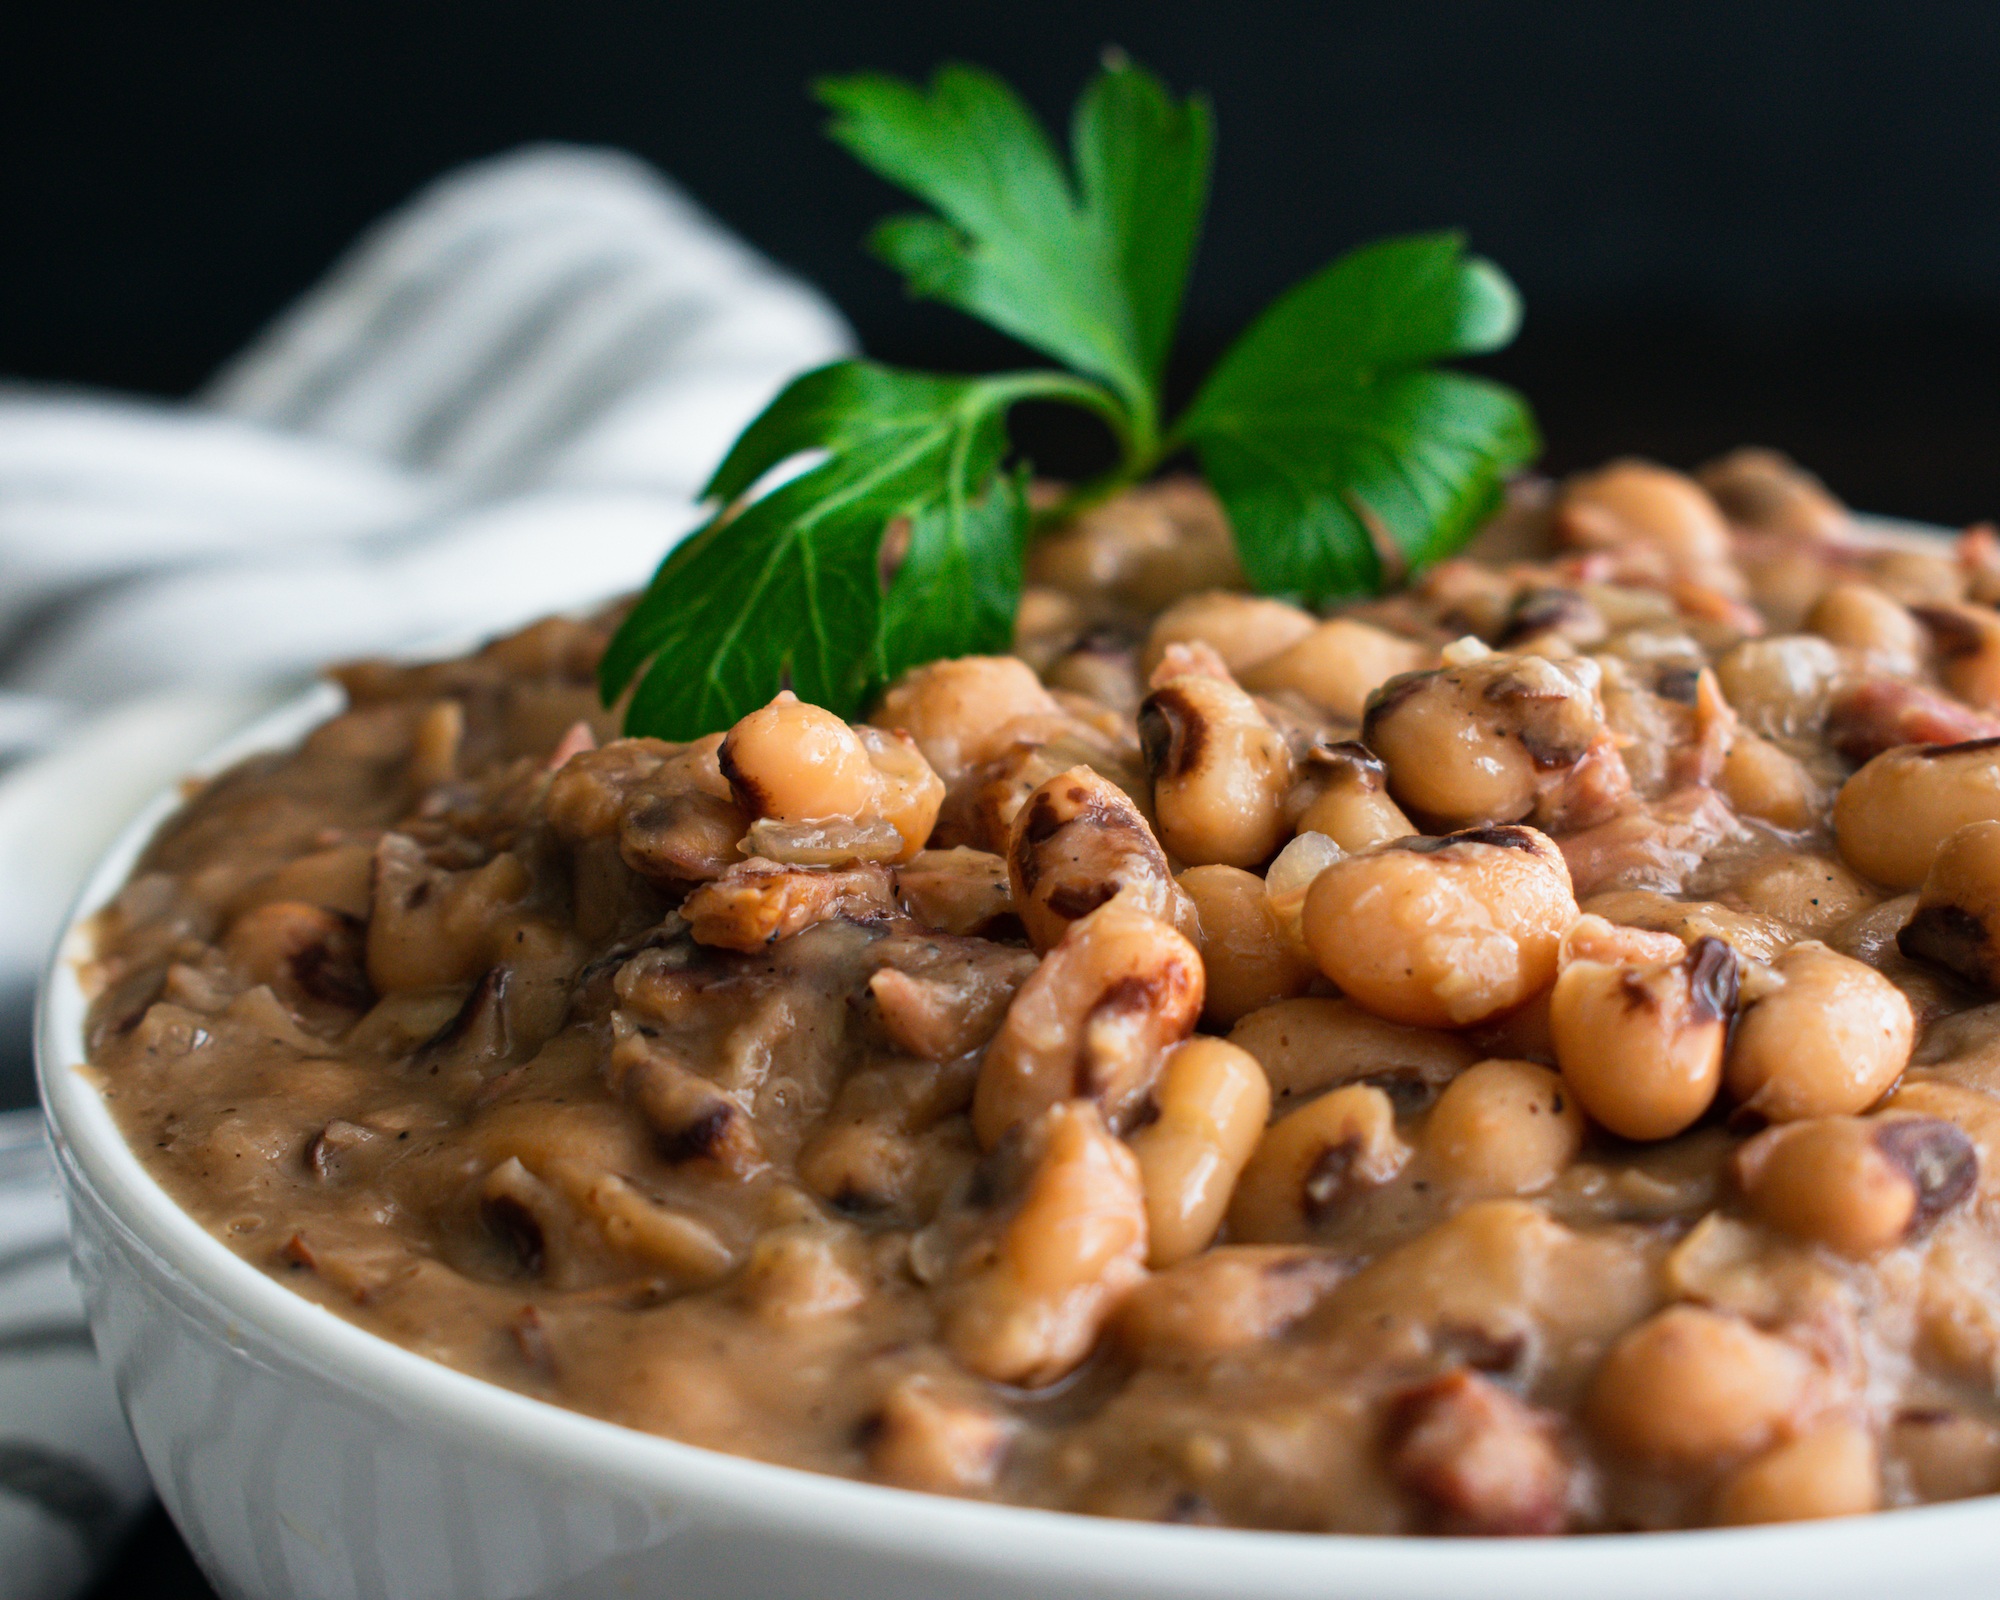 Black-Eyed Peas (Cowpeas): Nutrition Facts and Benefits